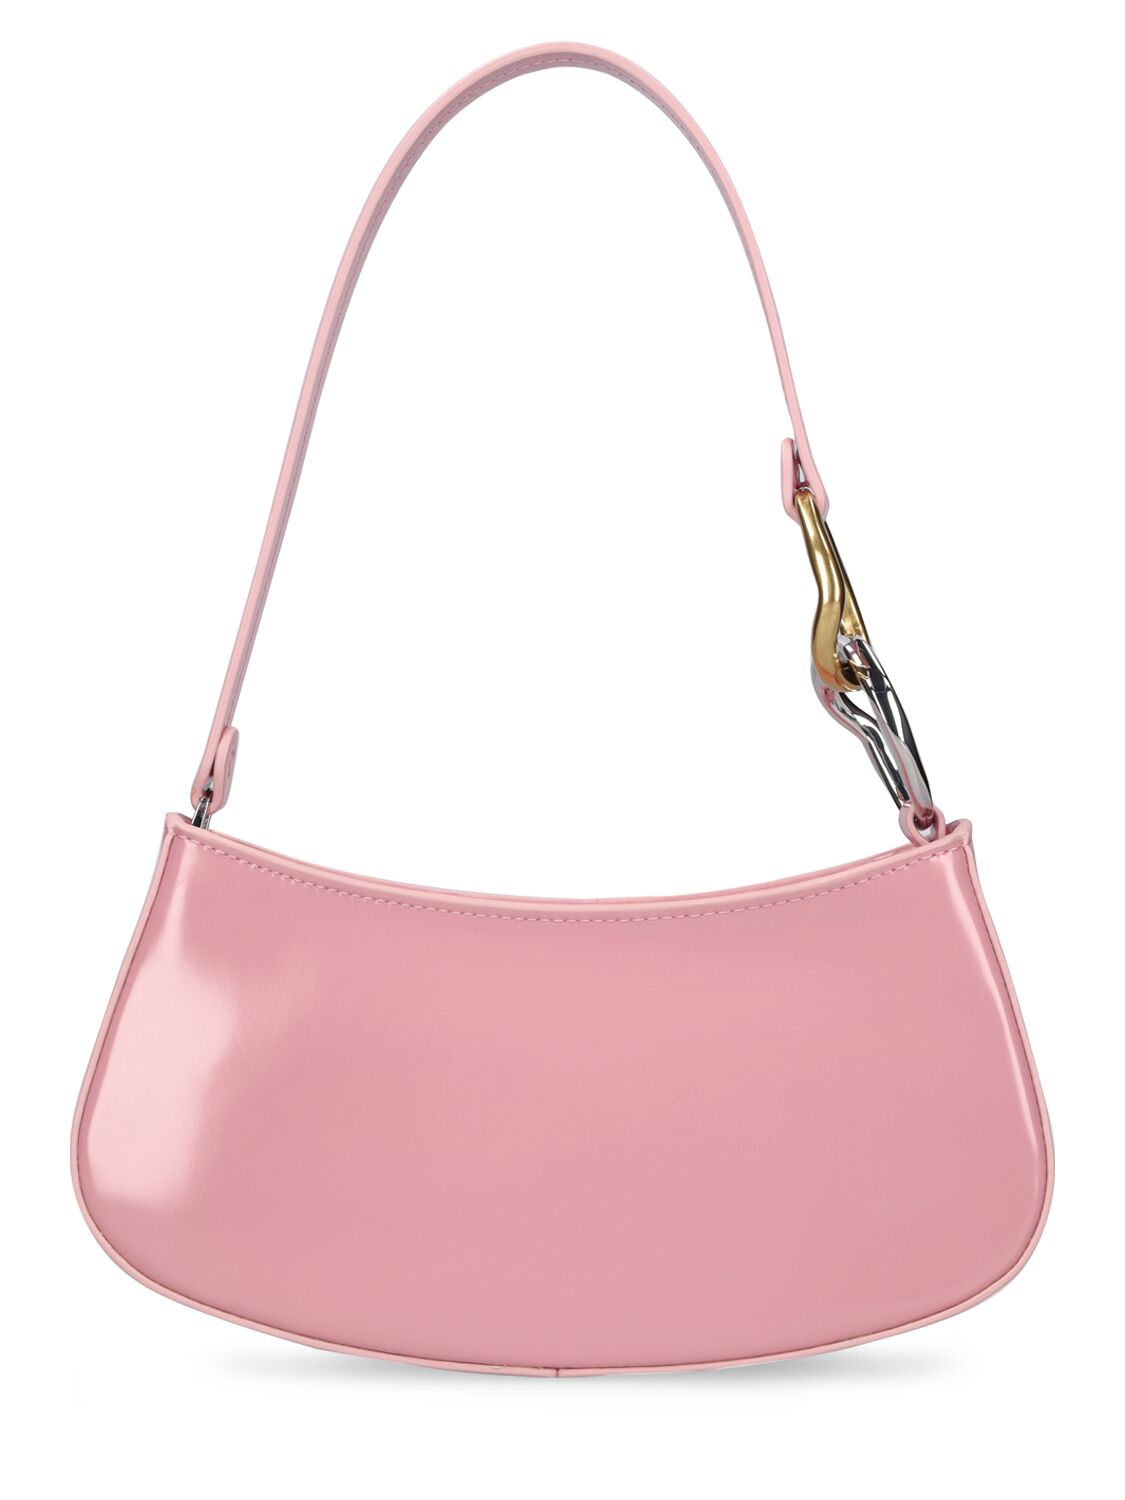 Shop Staud Ollie Patent Leather Shoulder Bag In Cherry Blossom